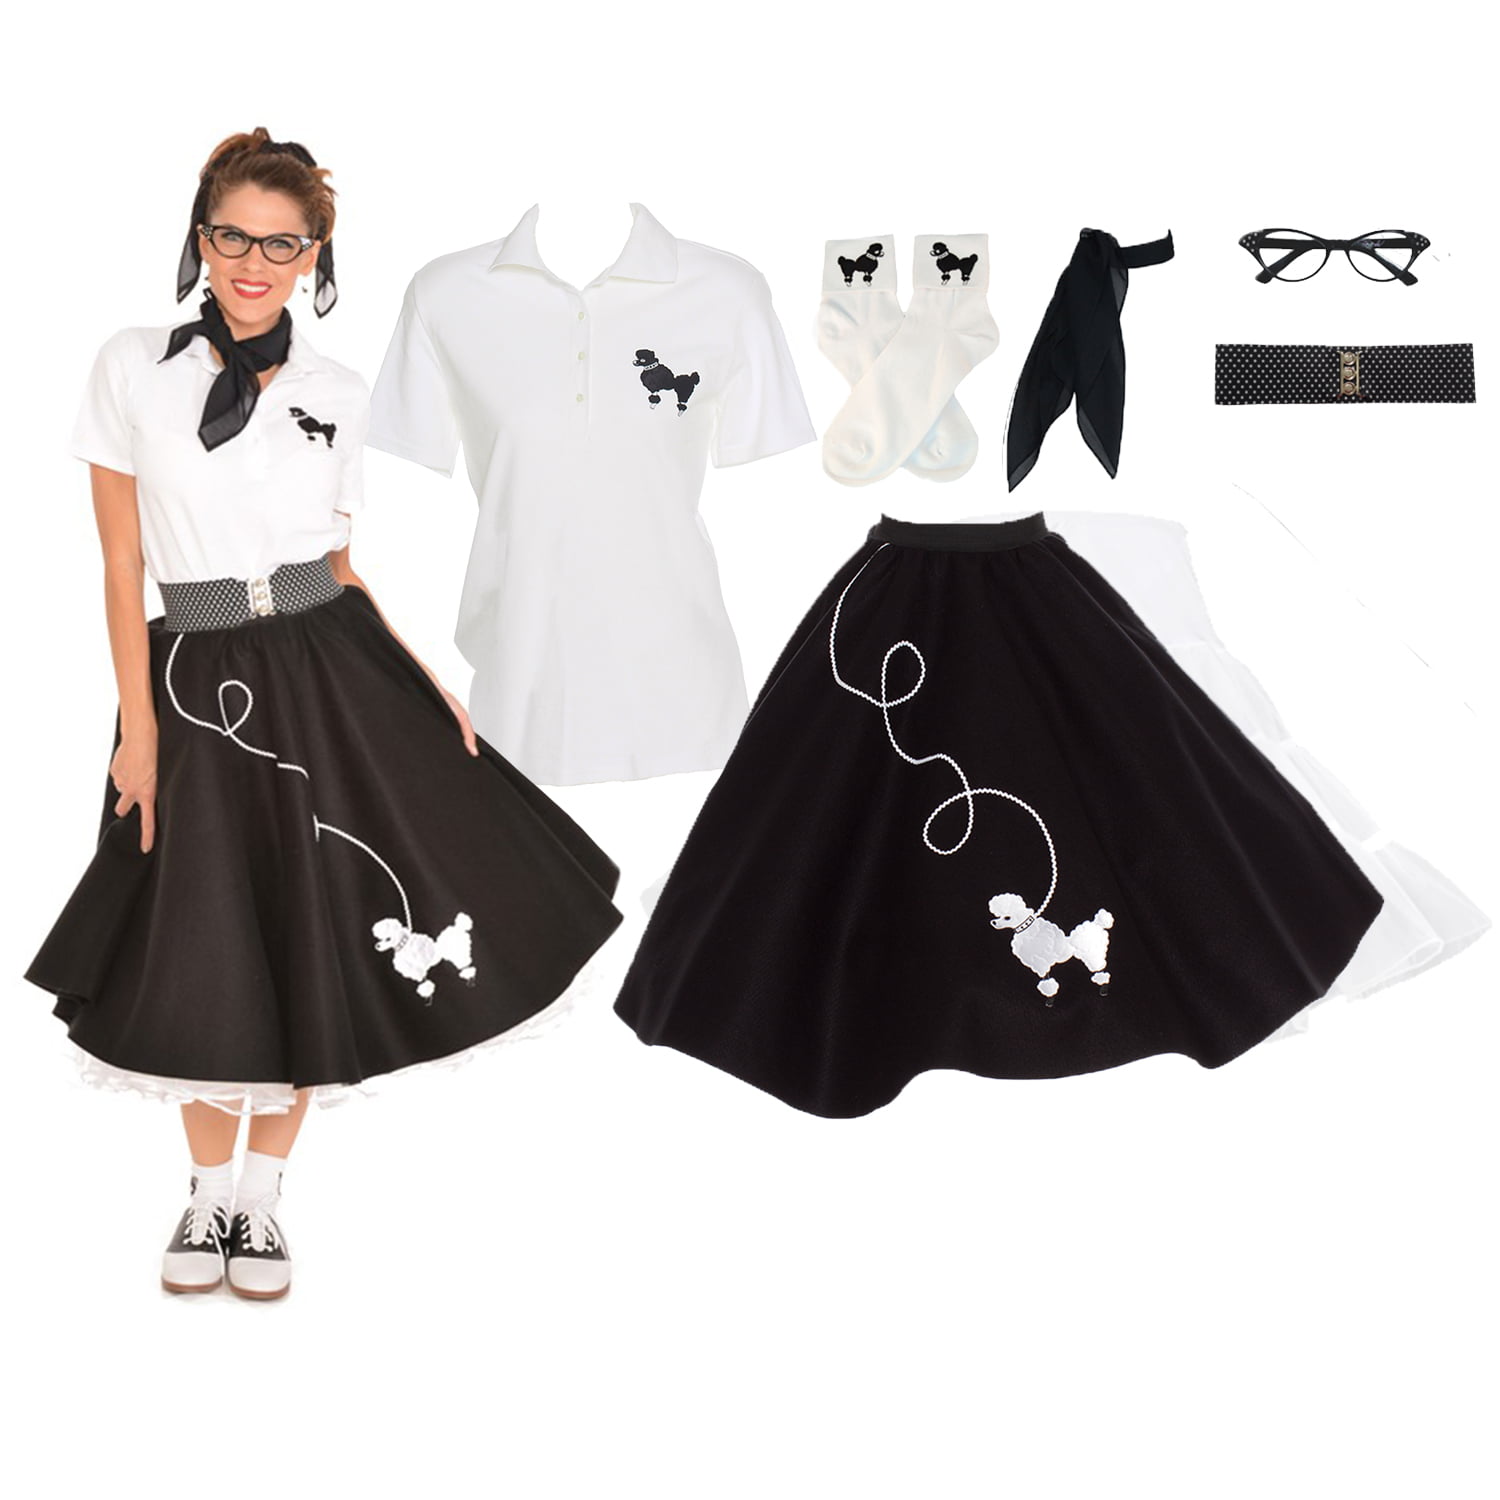 Hip Hop 50s Style Womens 2 pc Poodle Skirt Outfit Halloween or Dance Costume Set 